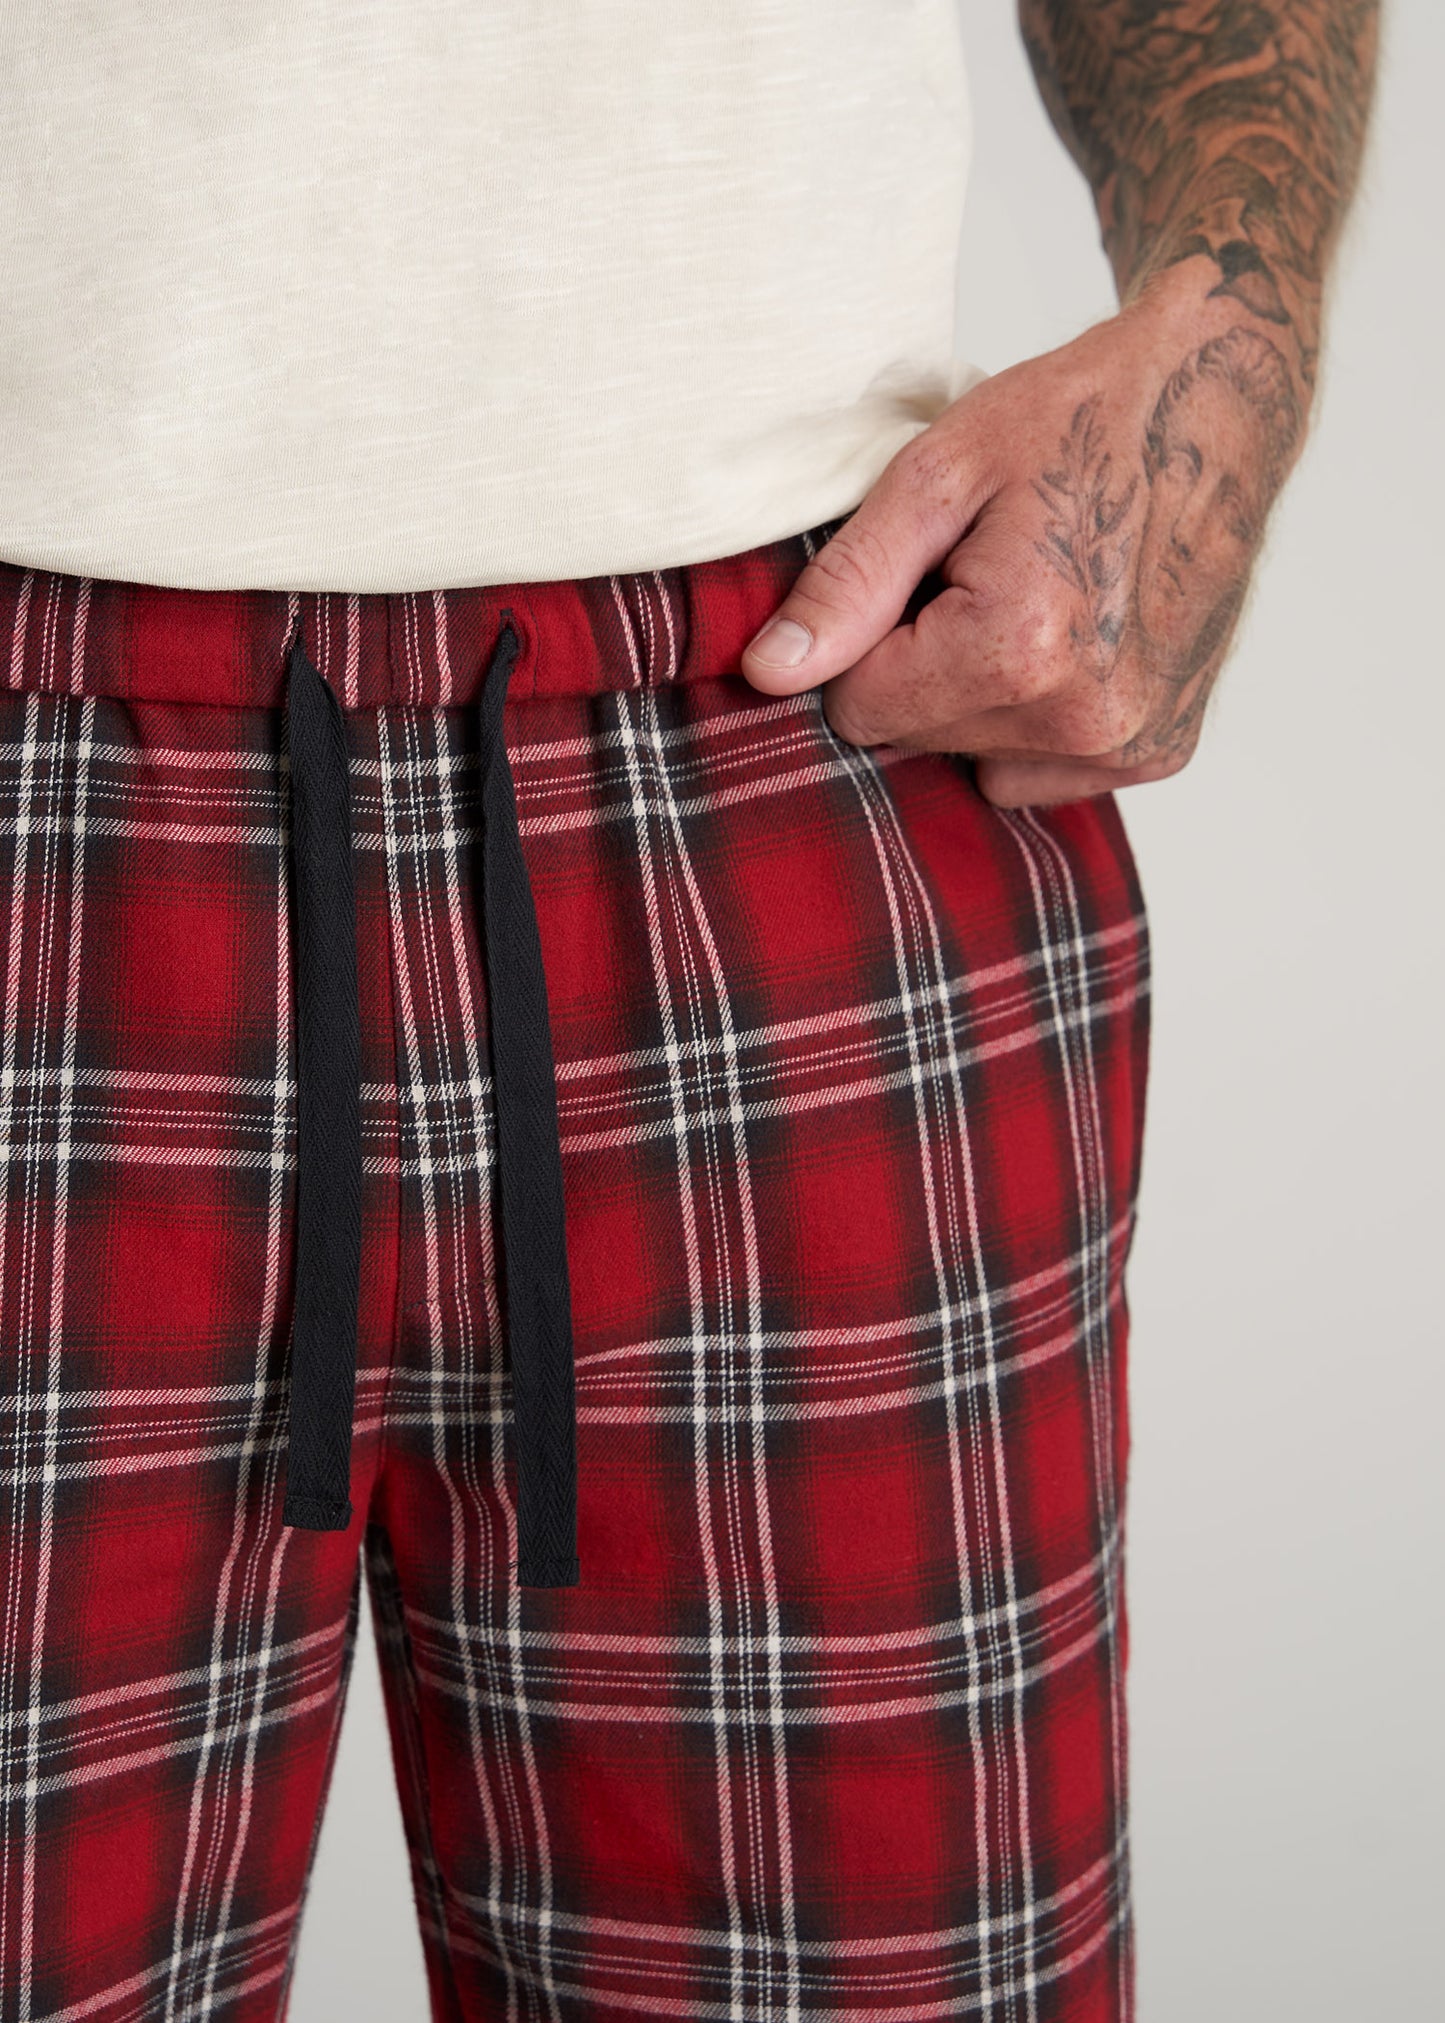 Disney Lounge Pants - Mickey Mouse Holiday Plaid Flannel Pants for Men